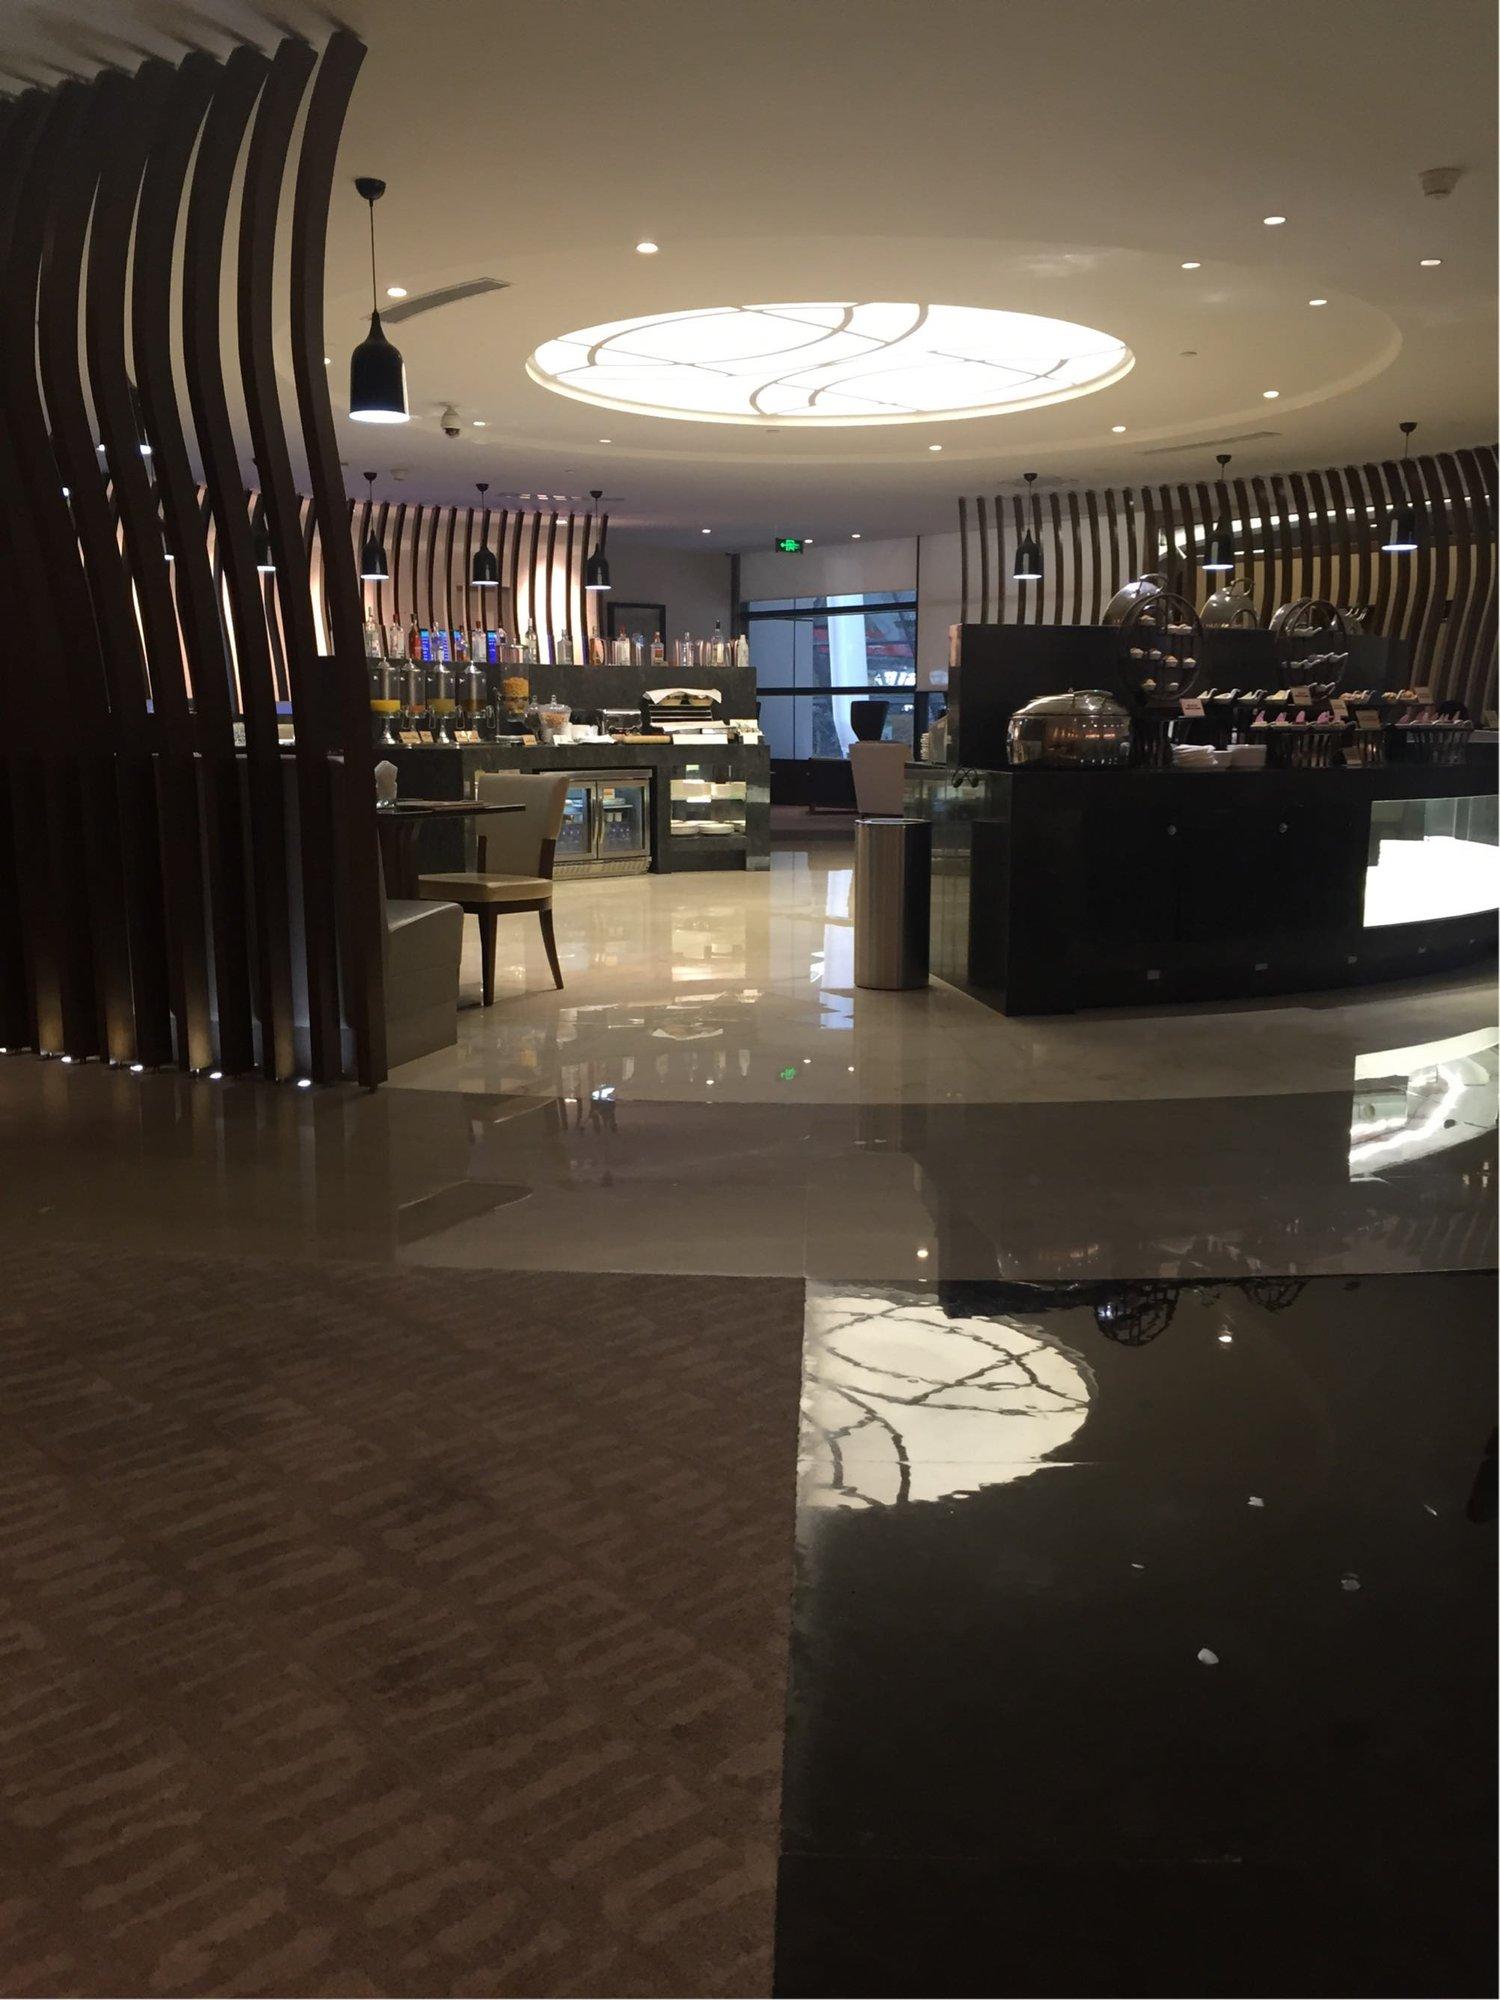 No. 71 Air China First Class Lounge image 5 of 10